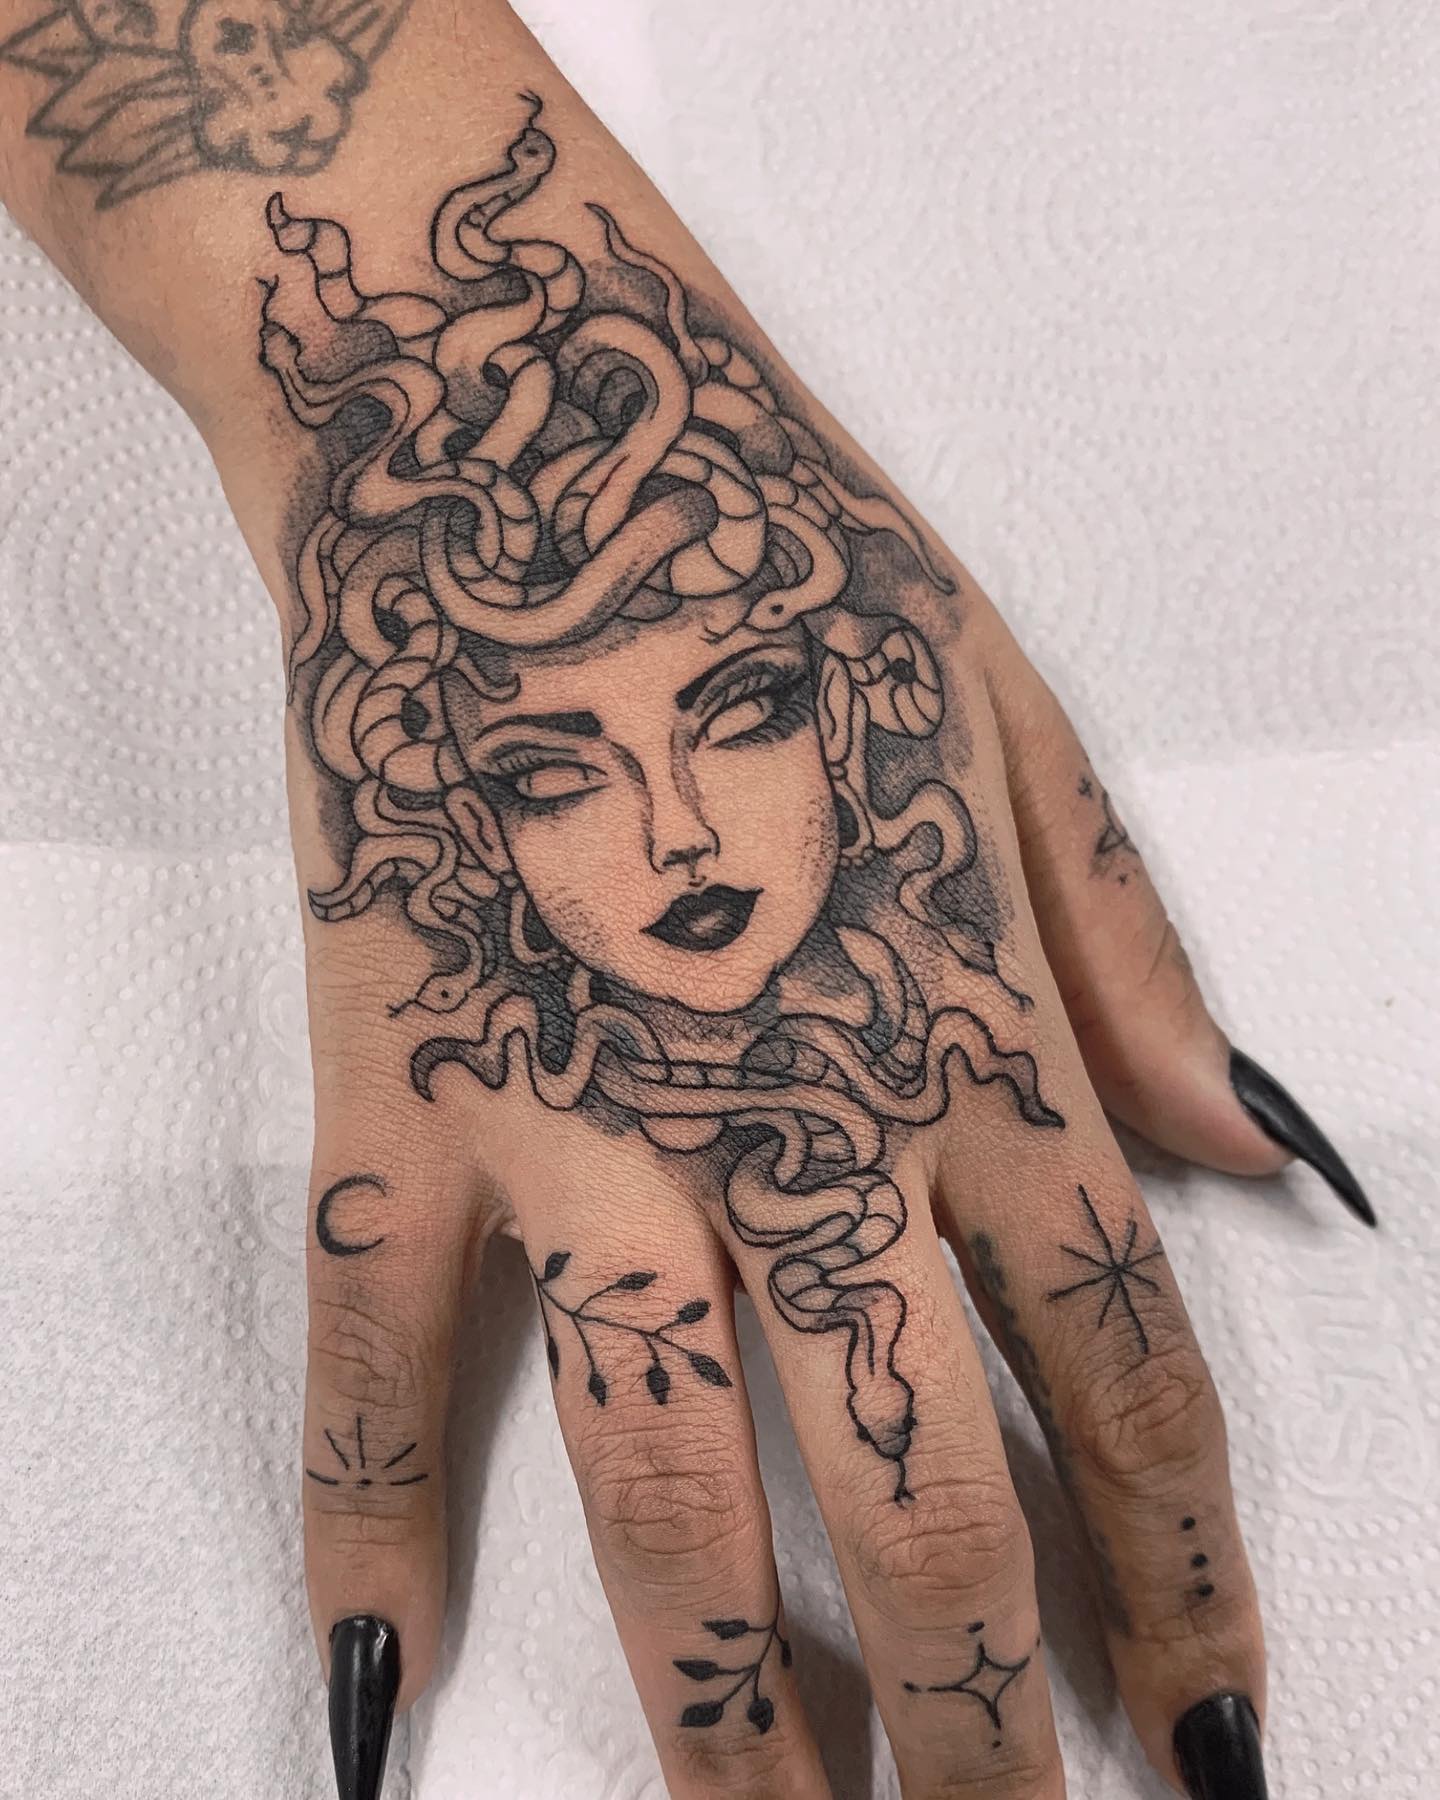 Hand tattoos take a lot of courage because it's almost impossible not to see it every time. If you have made your decision to get a tattoo on your hand, one of the best tattoo designs is definitely a medusa face.